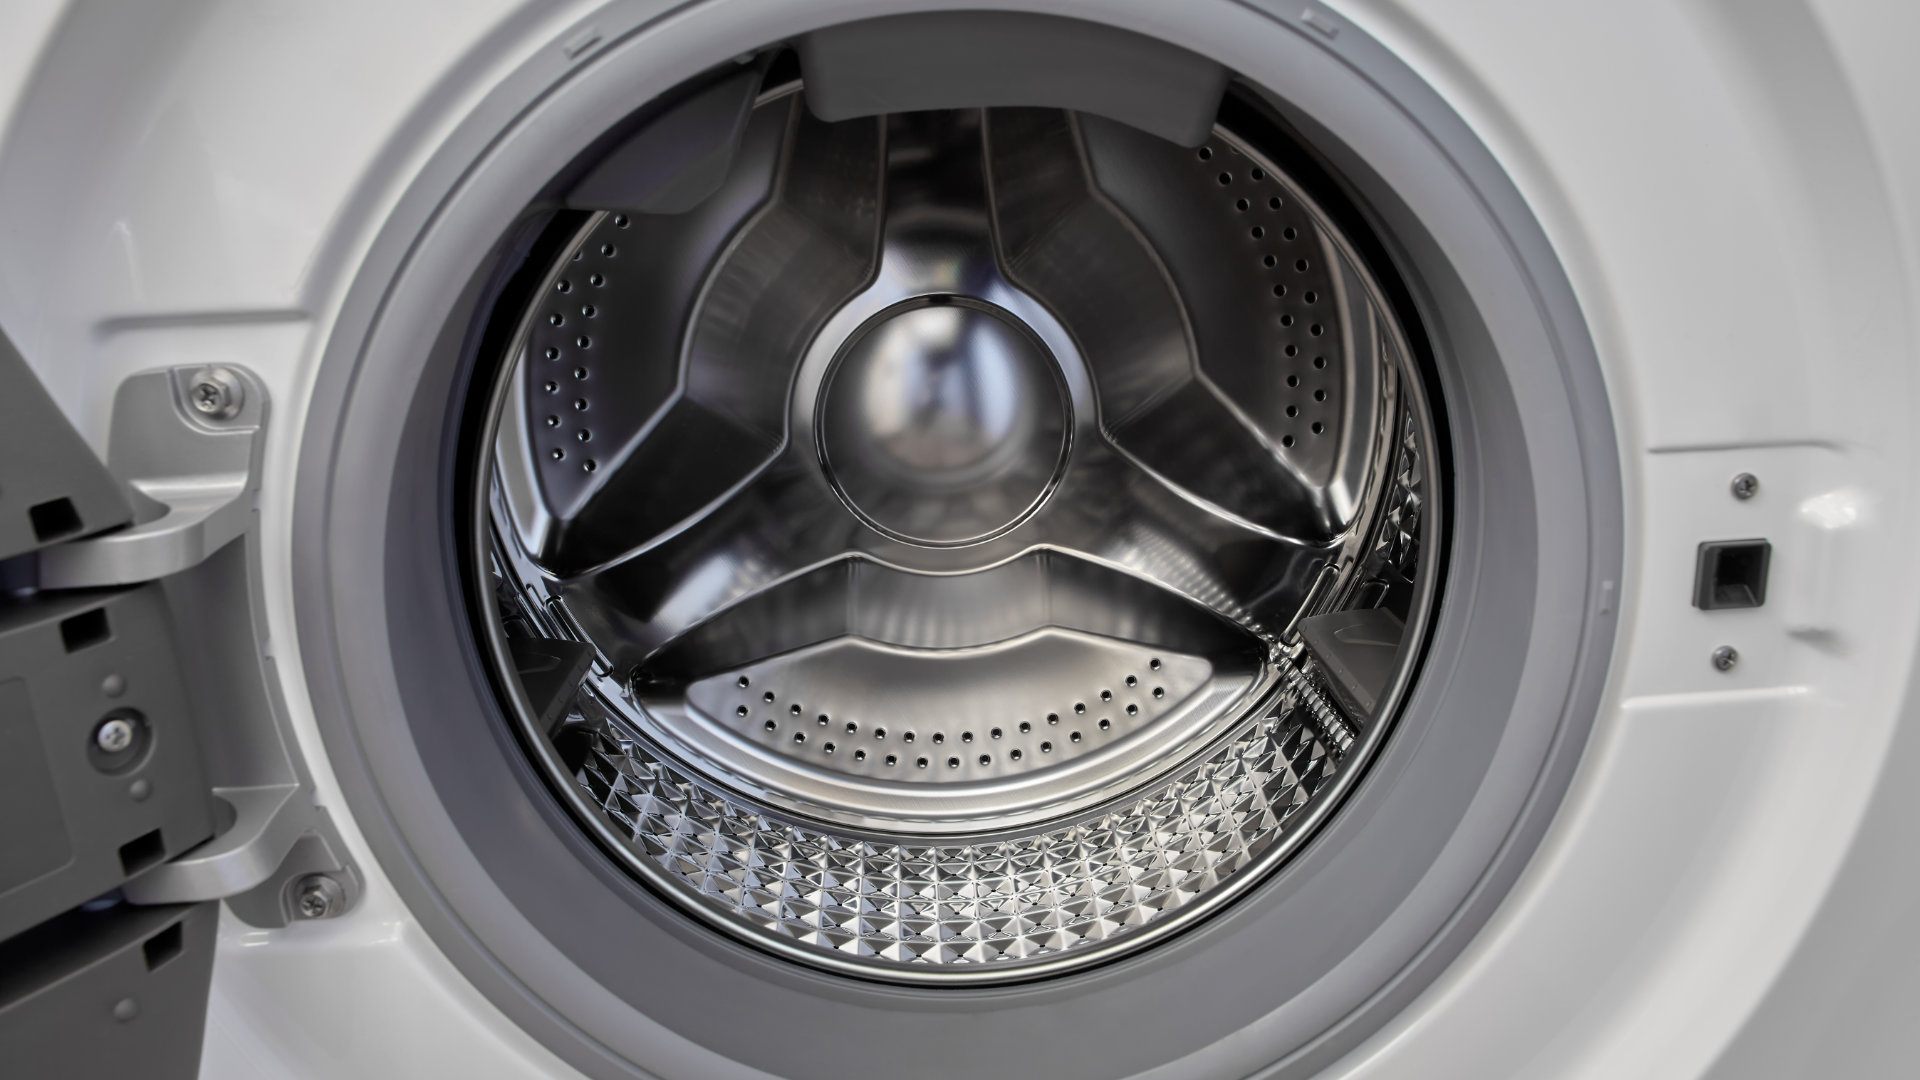 Maytag Centennial Dryer Not Spinning: Troubleshooting Tips to Get it Running Again